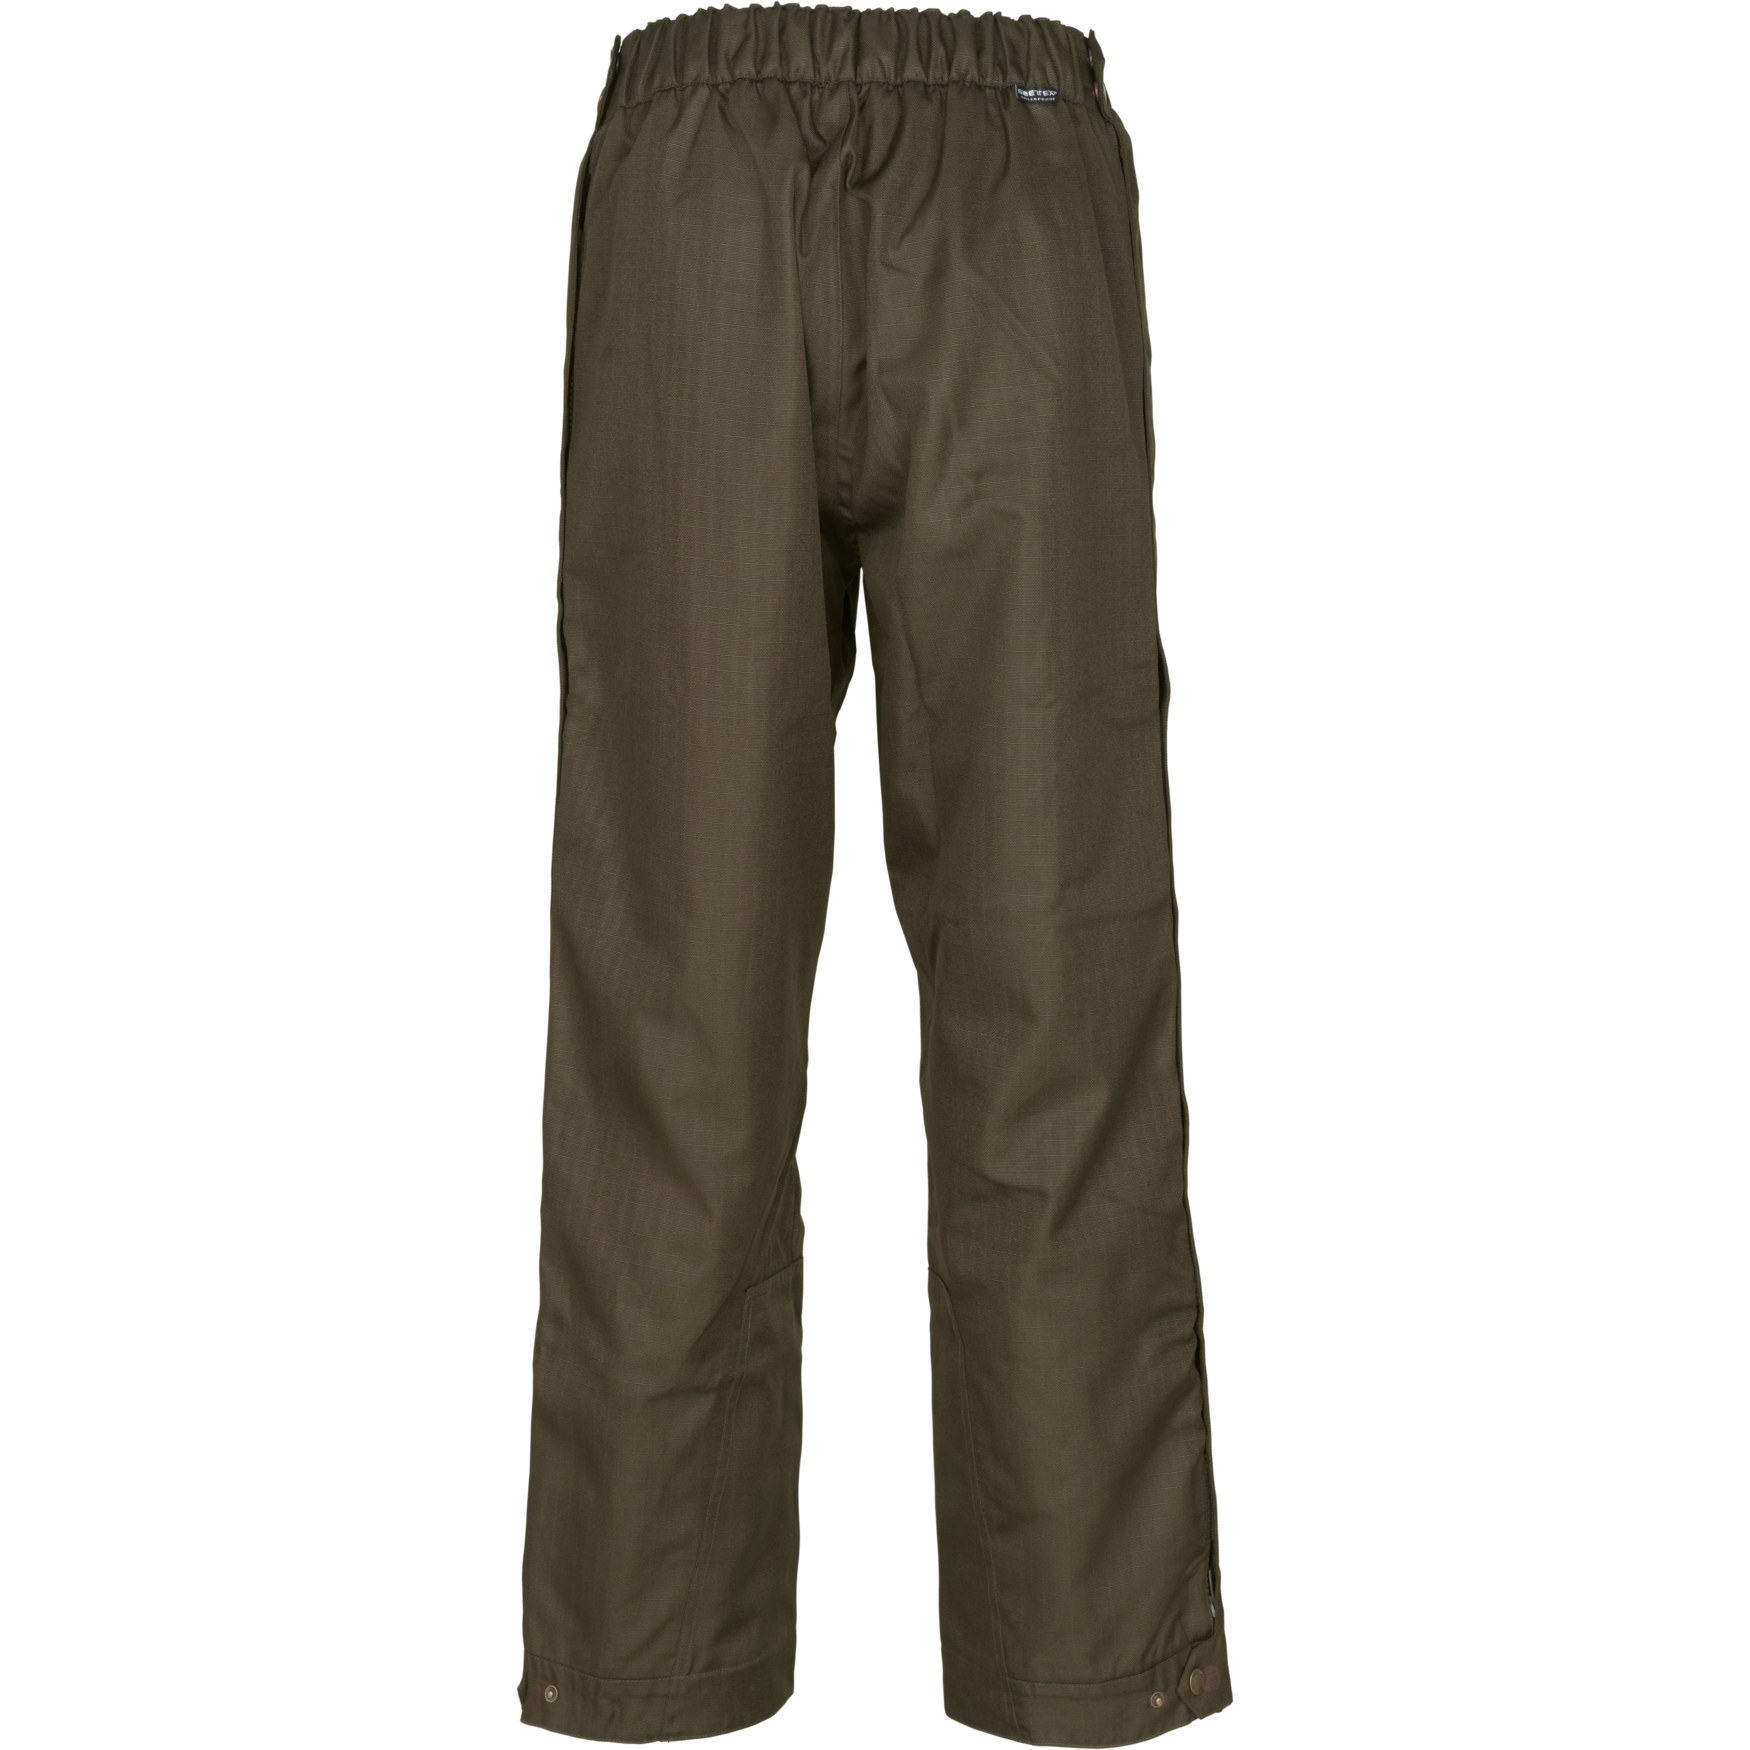 Seeland Buckthorn Overtrousers - Olive